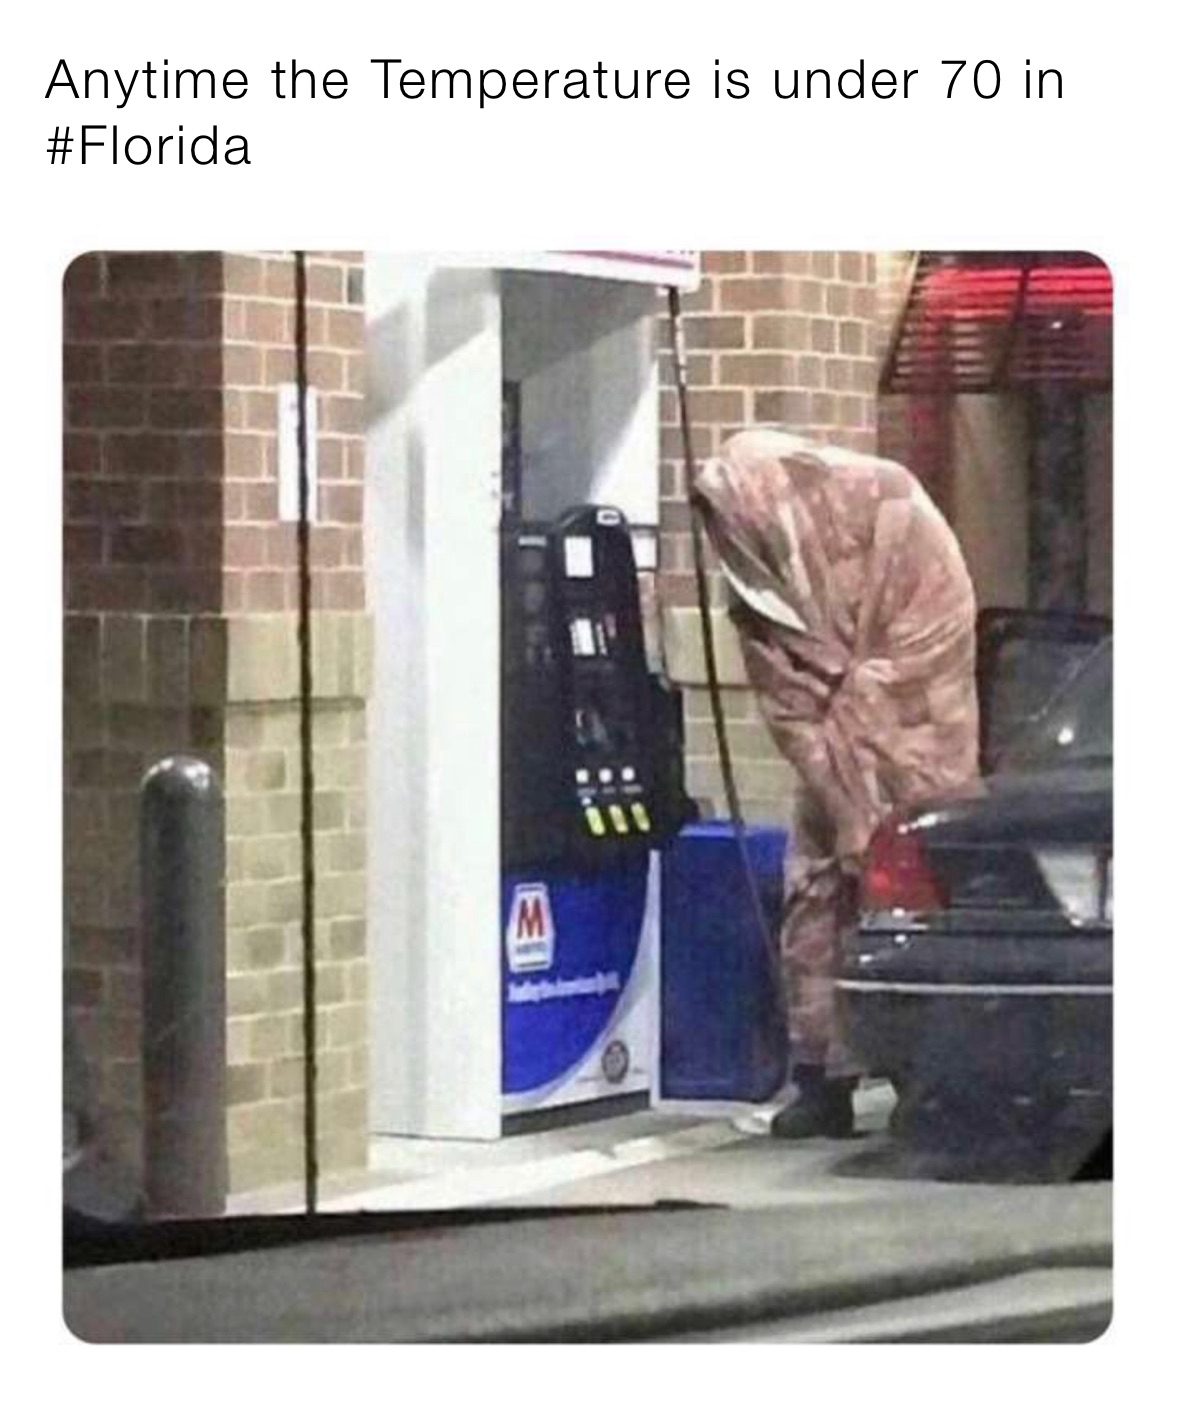 Anytime the Temperature is under 70 in #Florida